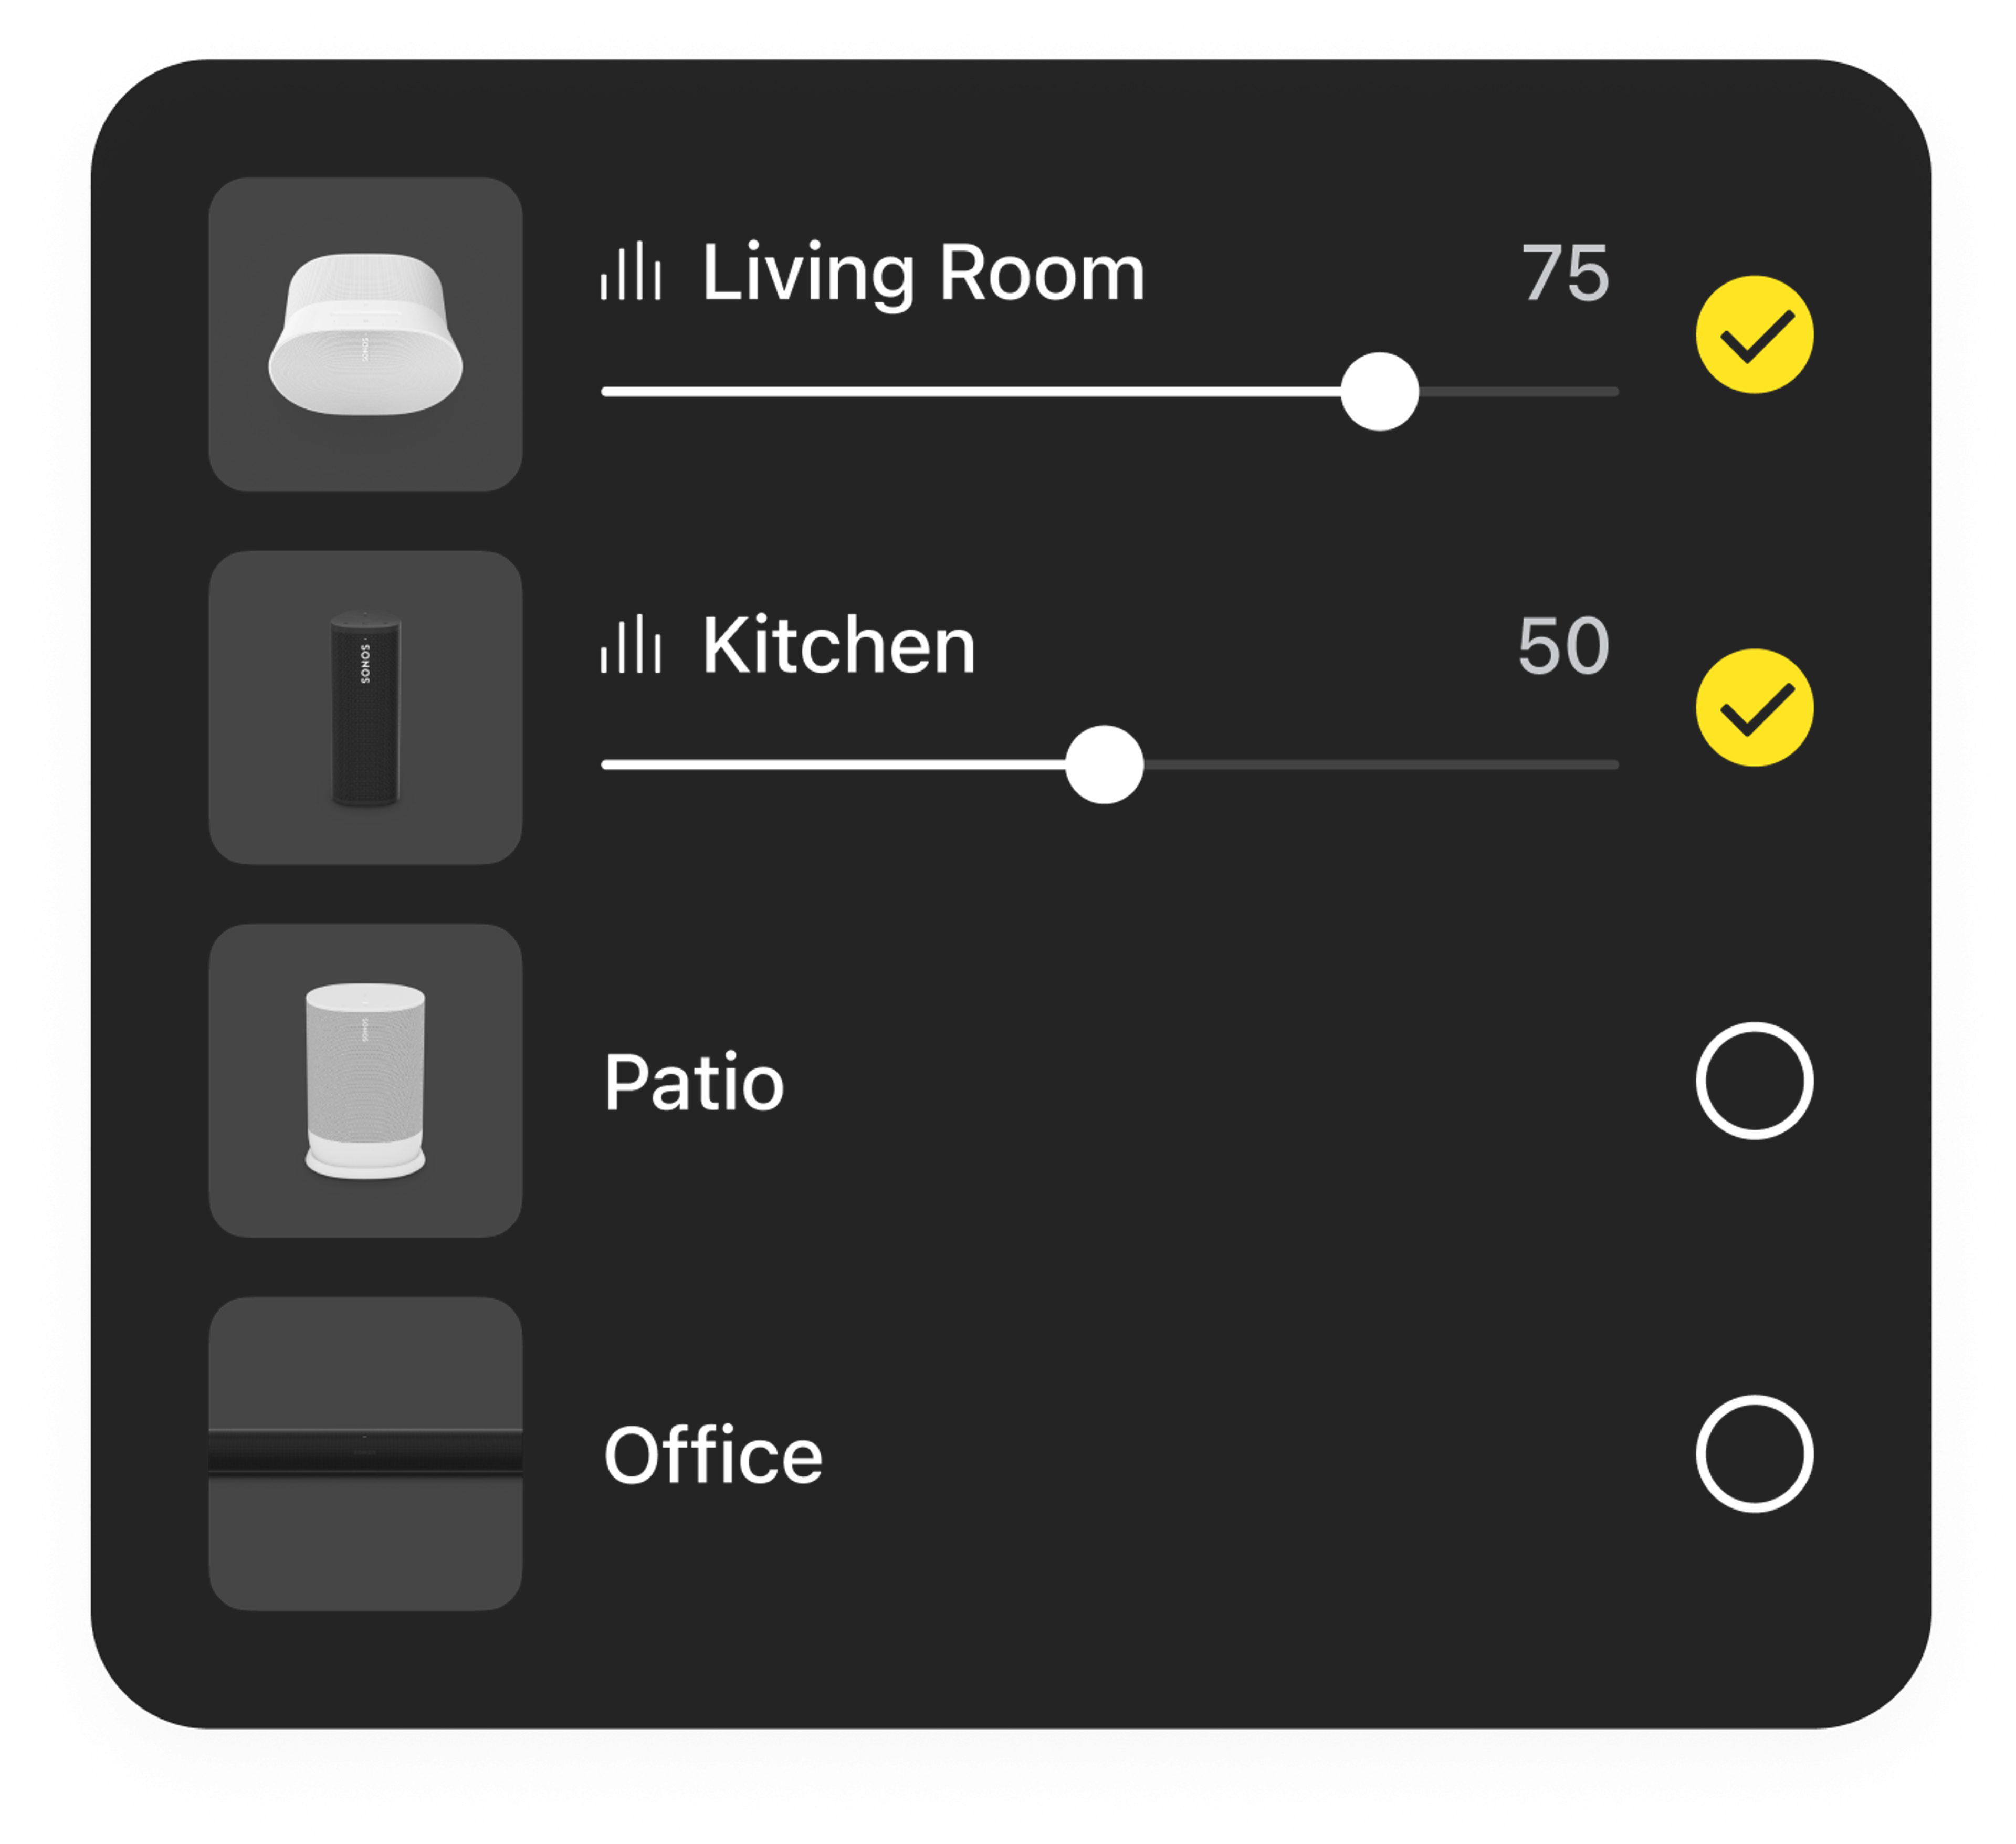 Example of the room volume controls in the Sonos app